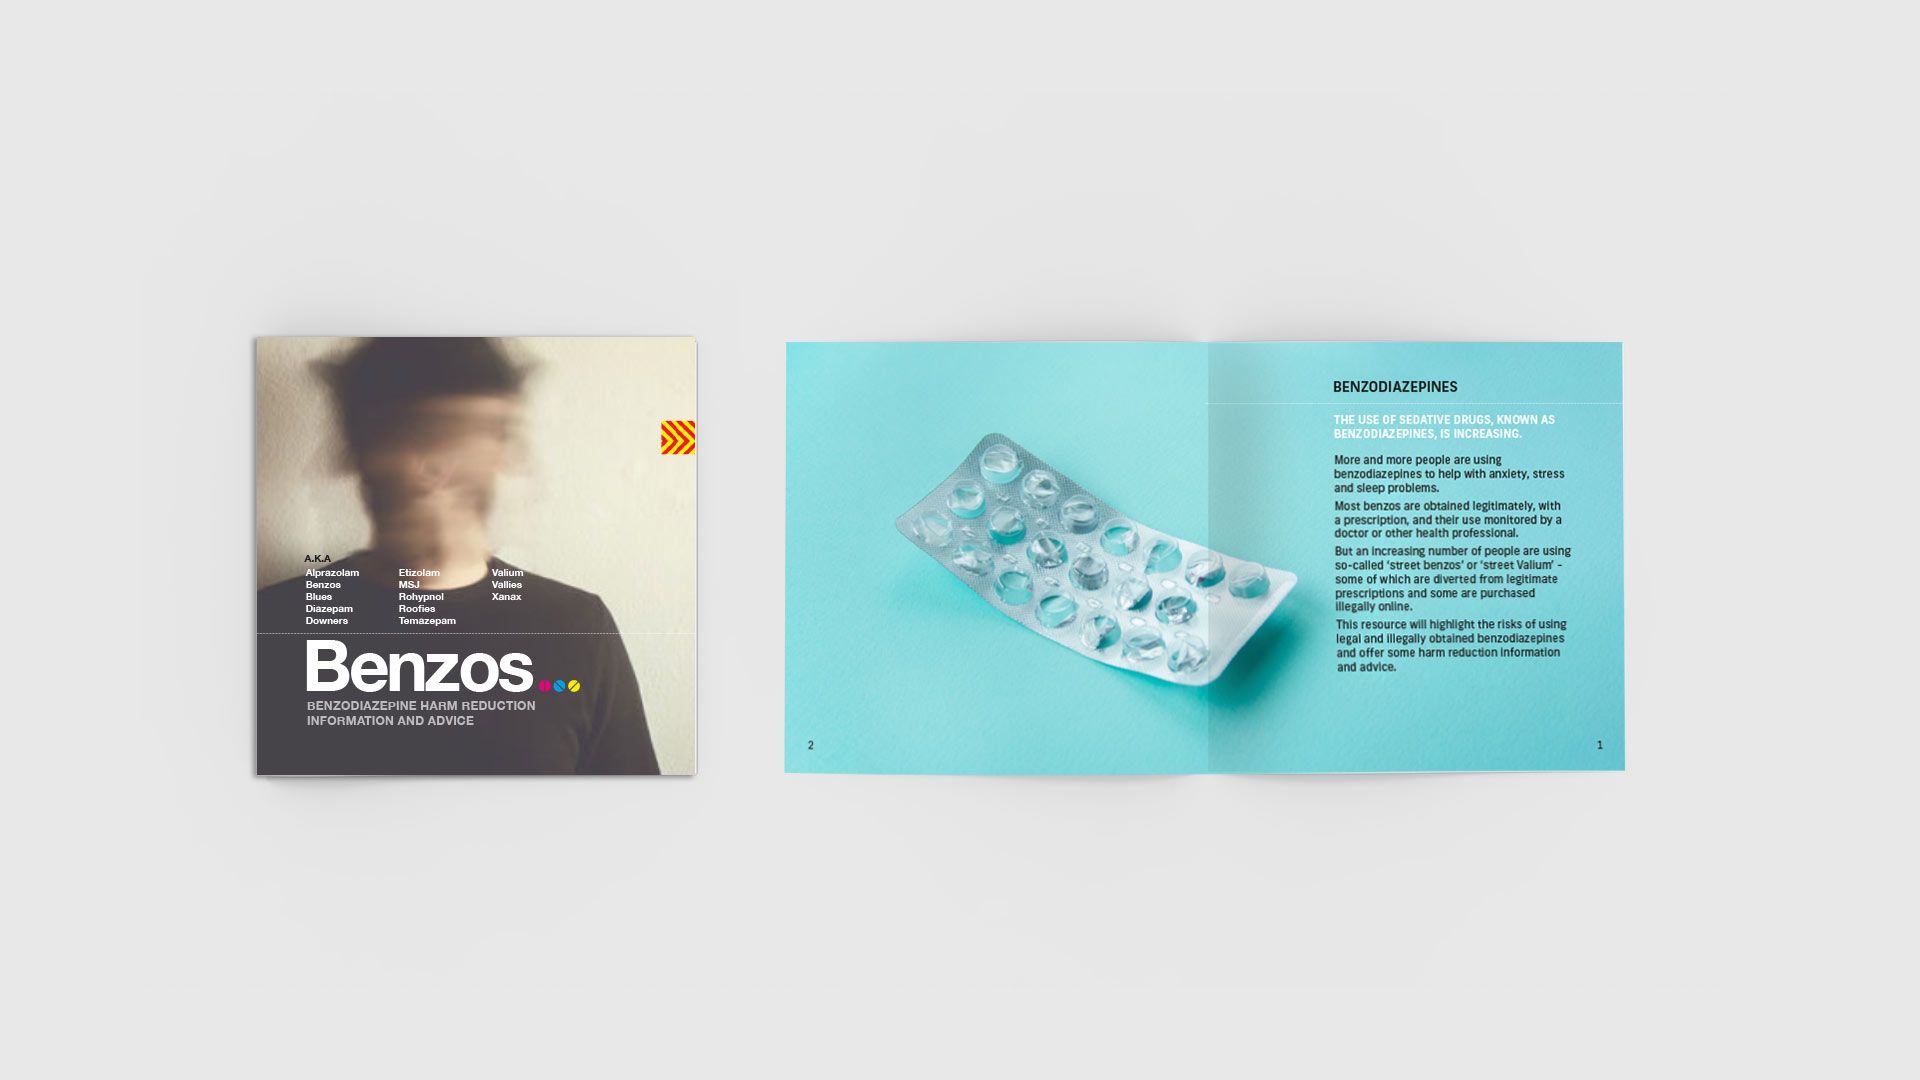 BENZODIAZEPINES advice booklet cover and inside page